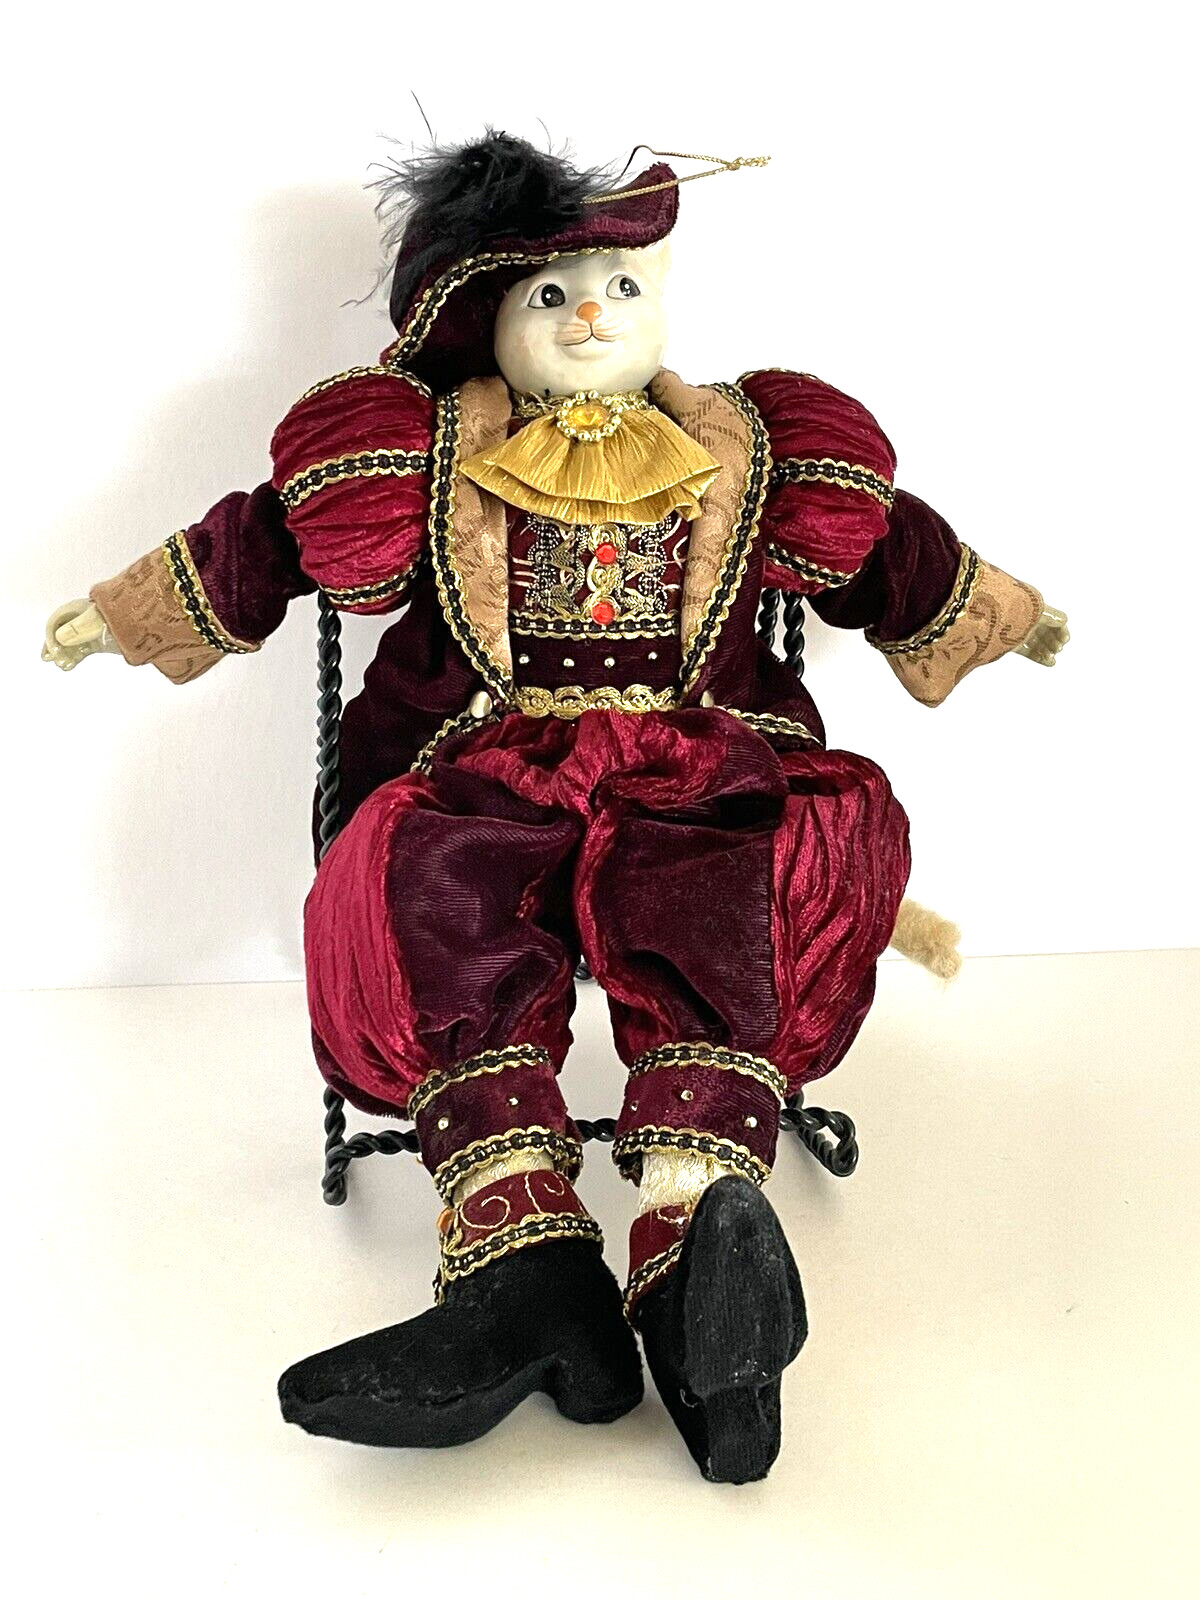 Dillards Trimmings Porcelain Royal Prince Cat Doll Ornament Velvet Fabric Outfit